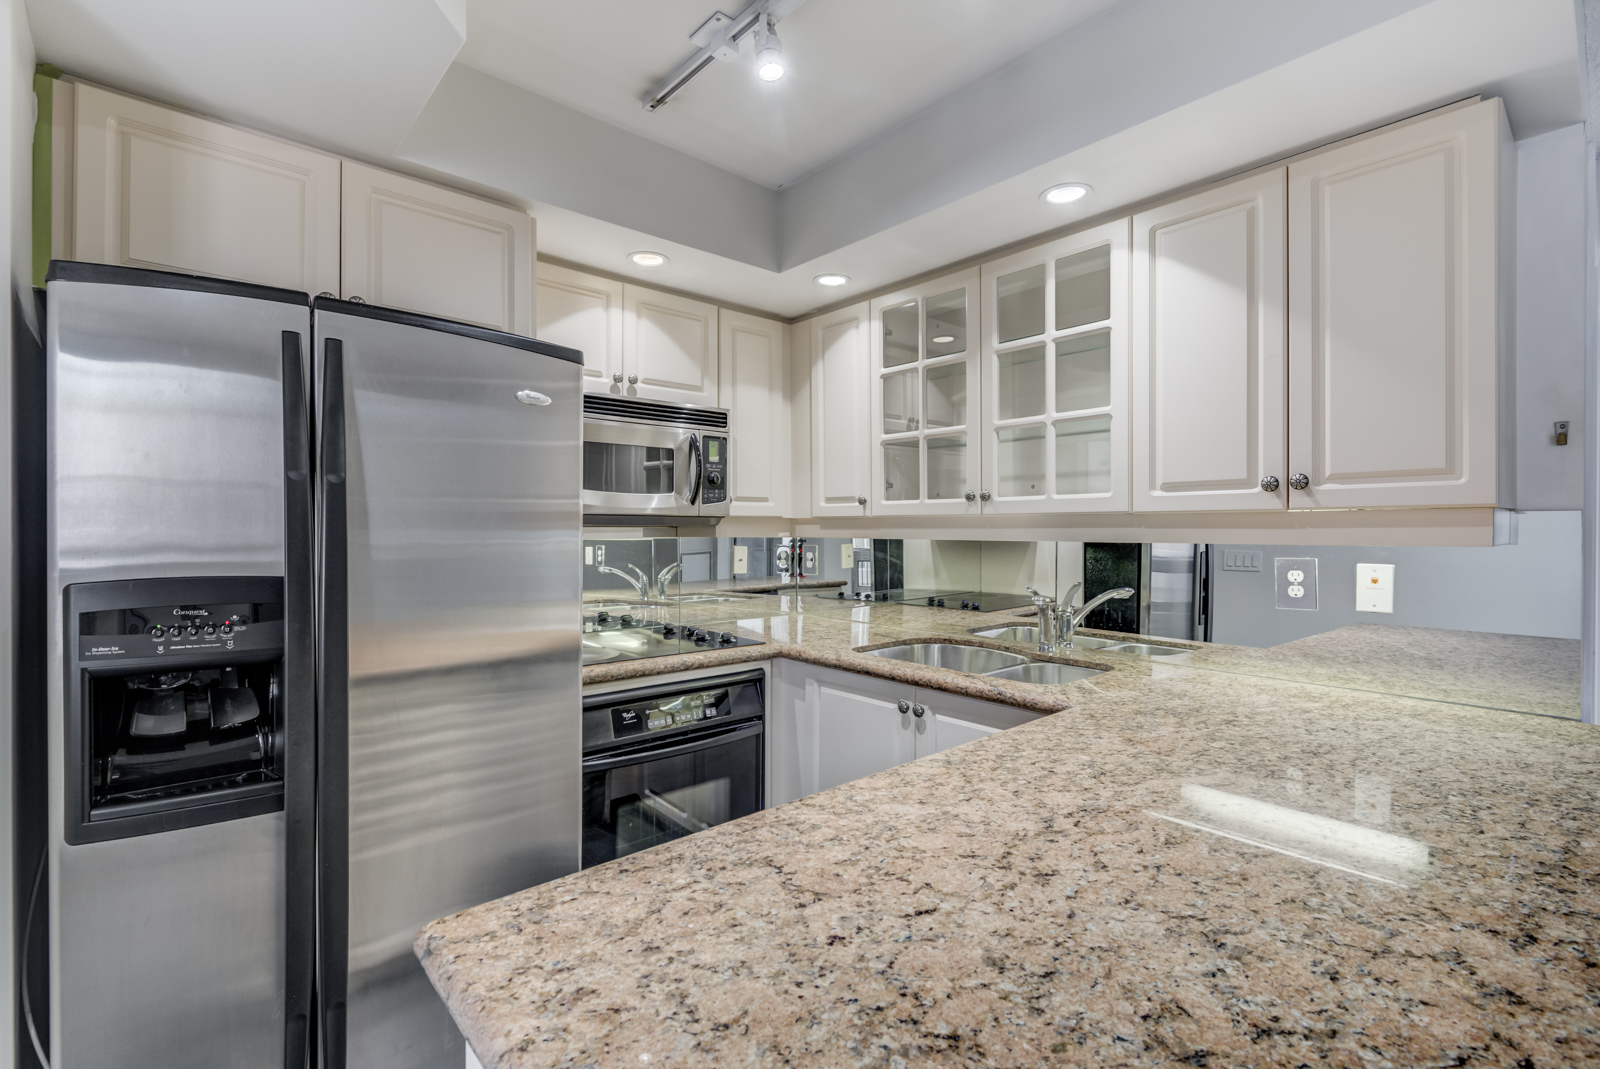 Close up of kitchen granite counter tops and silver appliances.